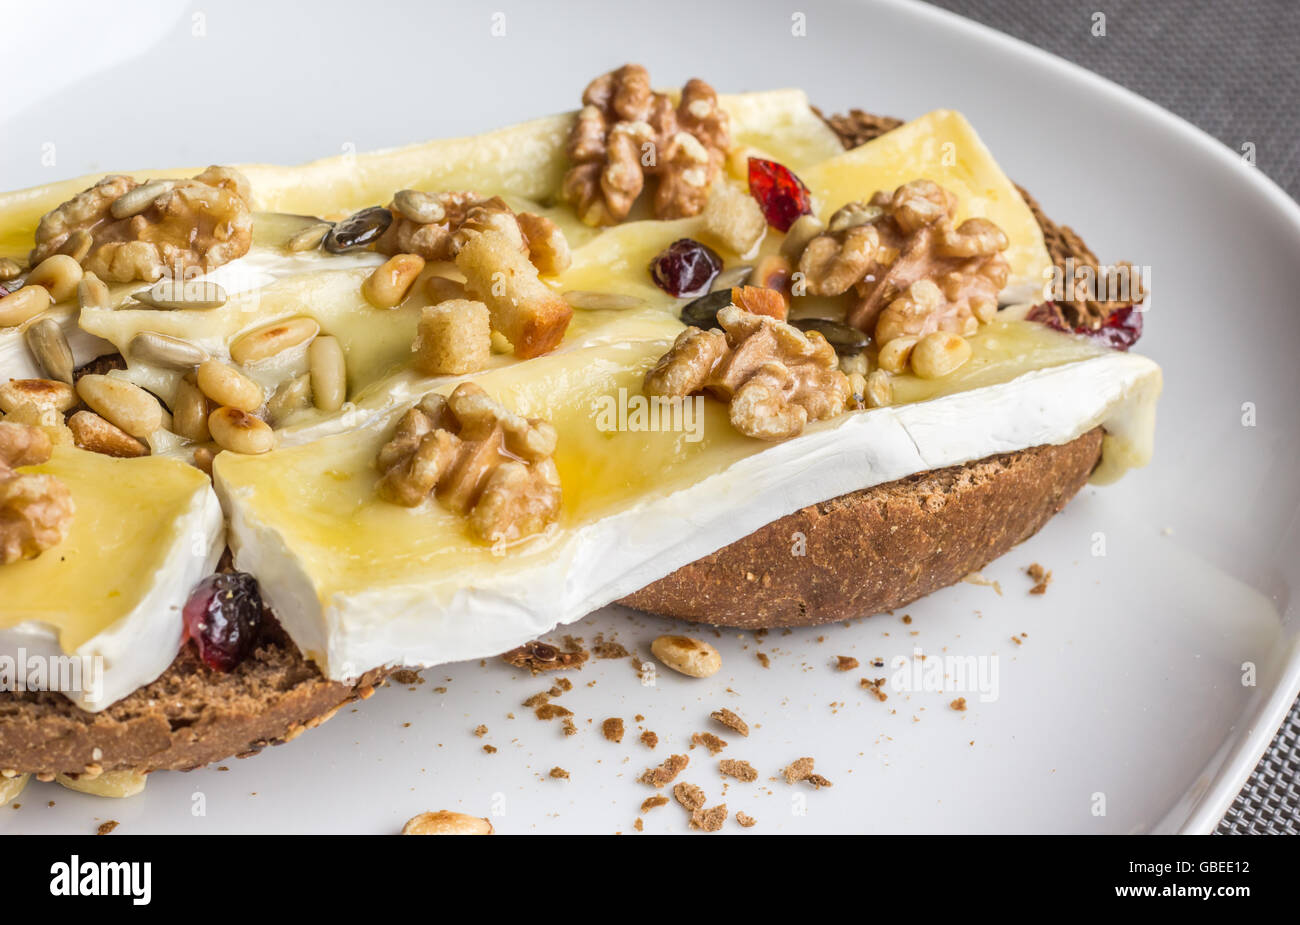 Melted brie with honey, pine nuts and walnuts on dark bread Stock Photo